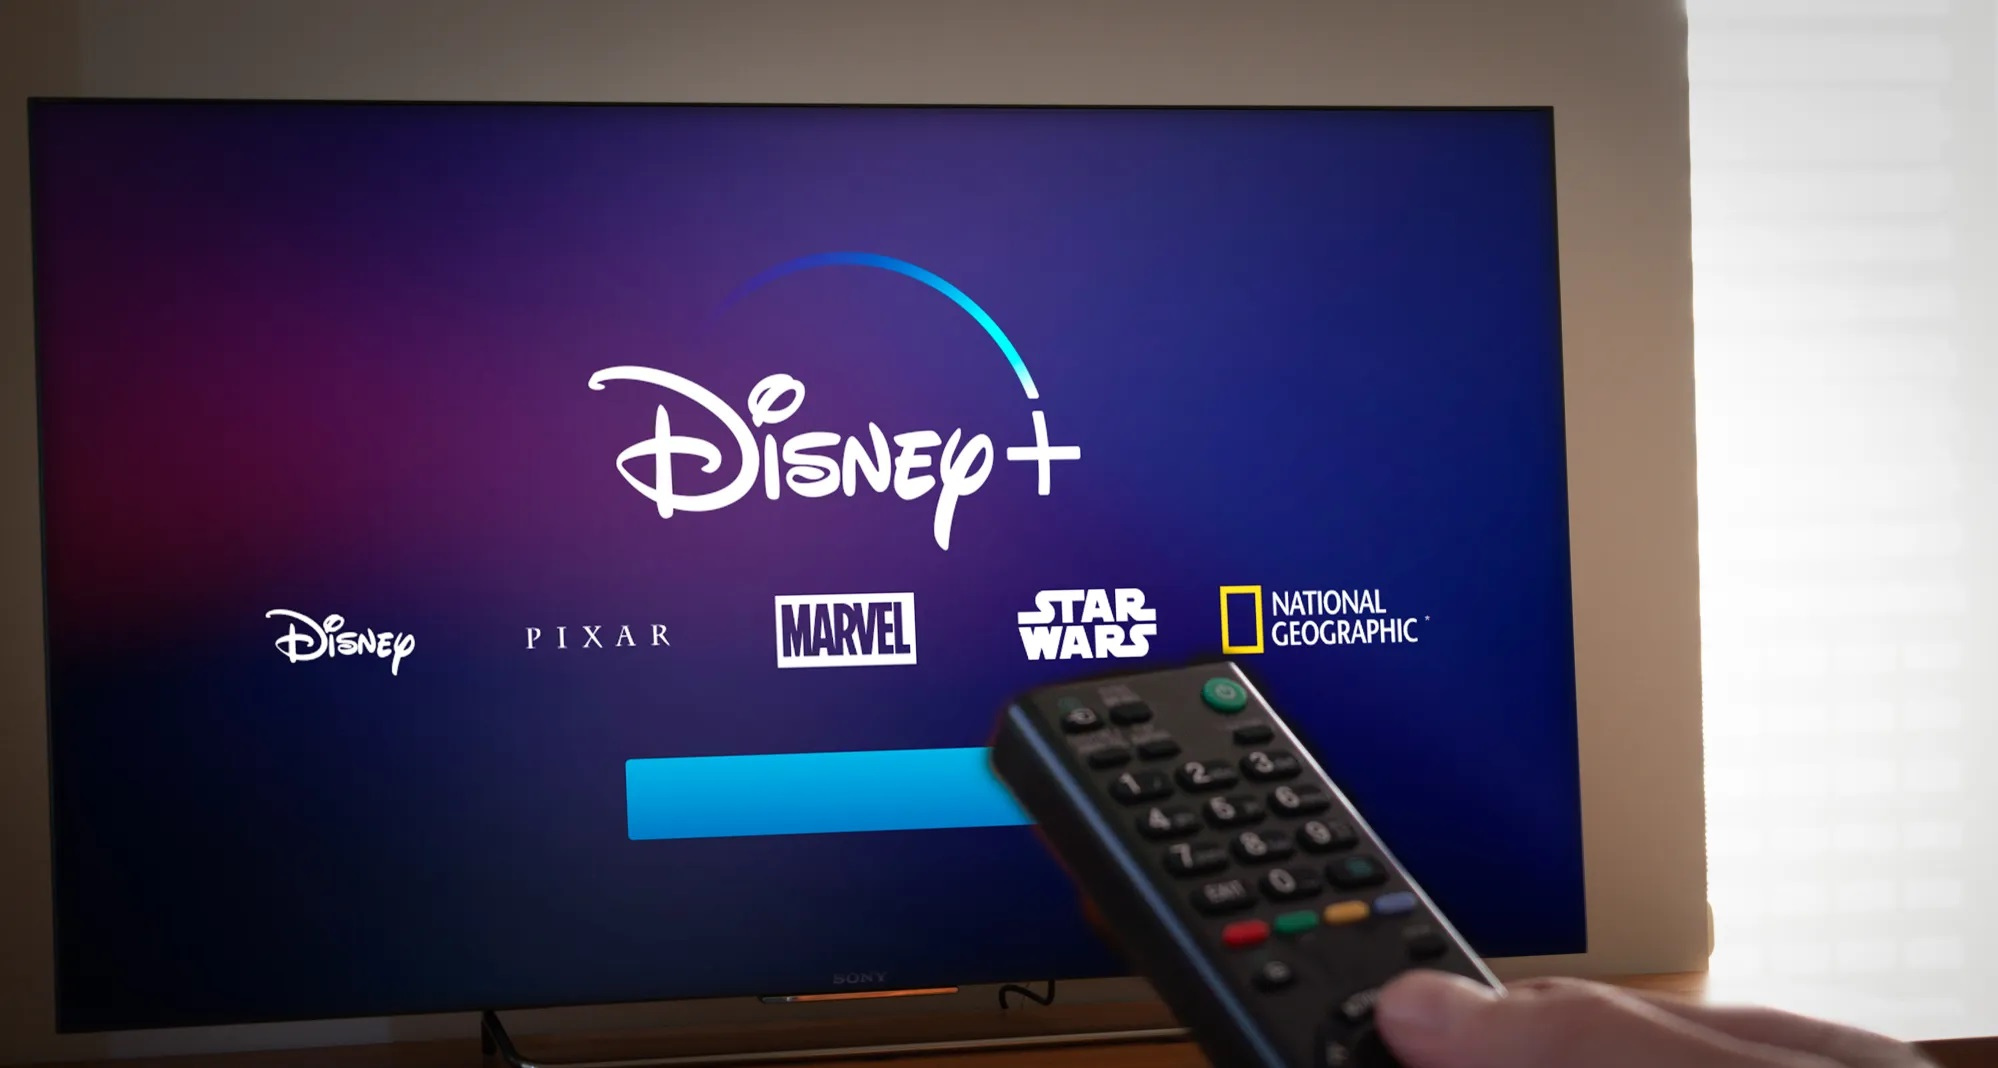 Say goodbye to sharing your Disney Plus password